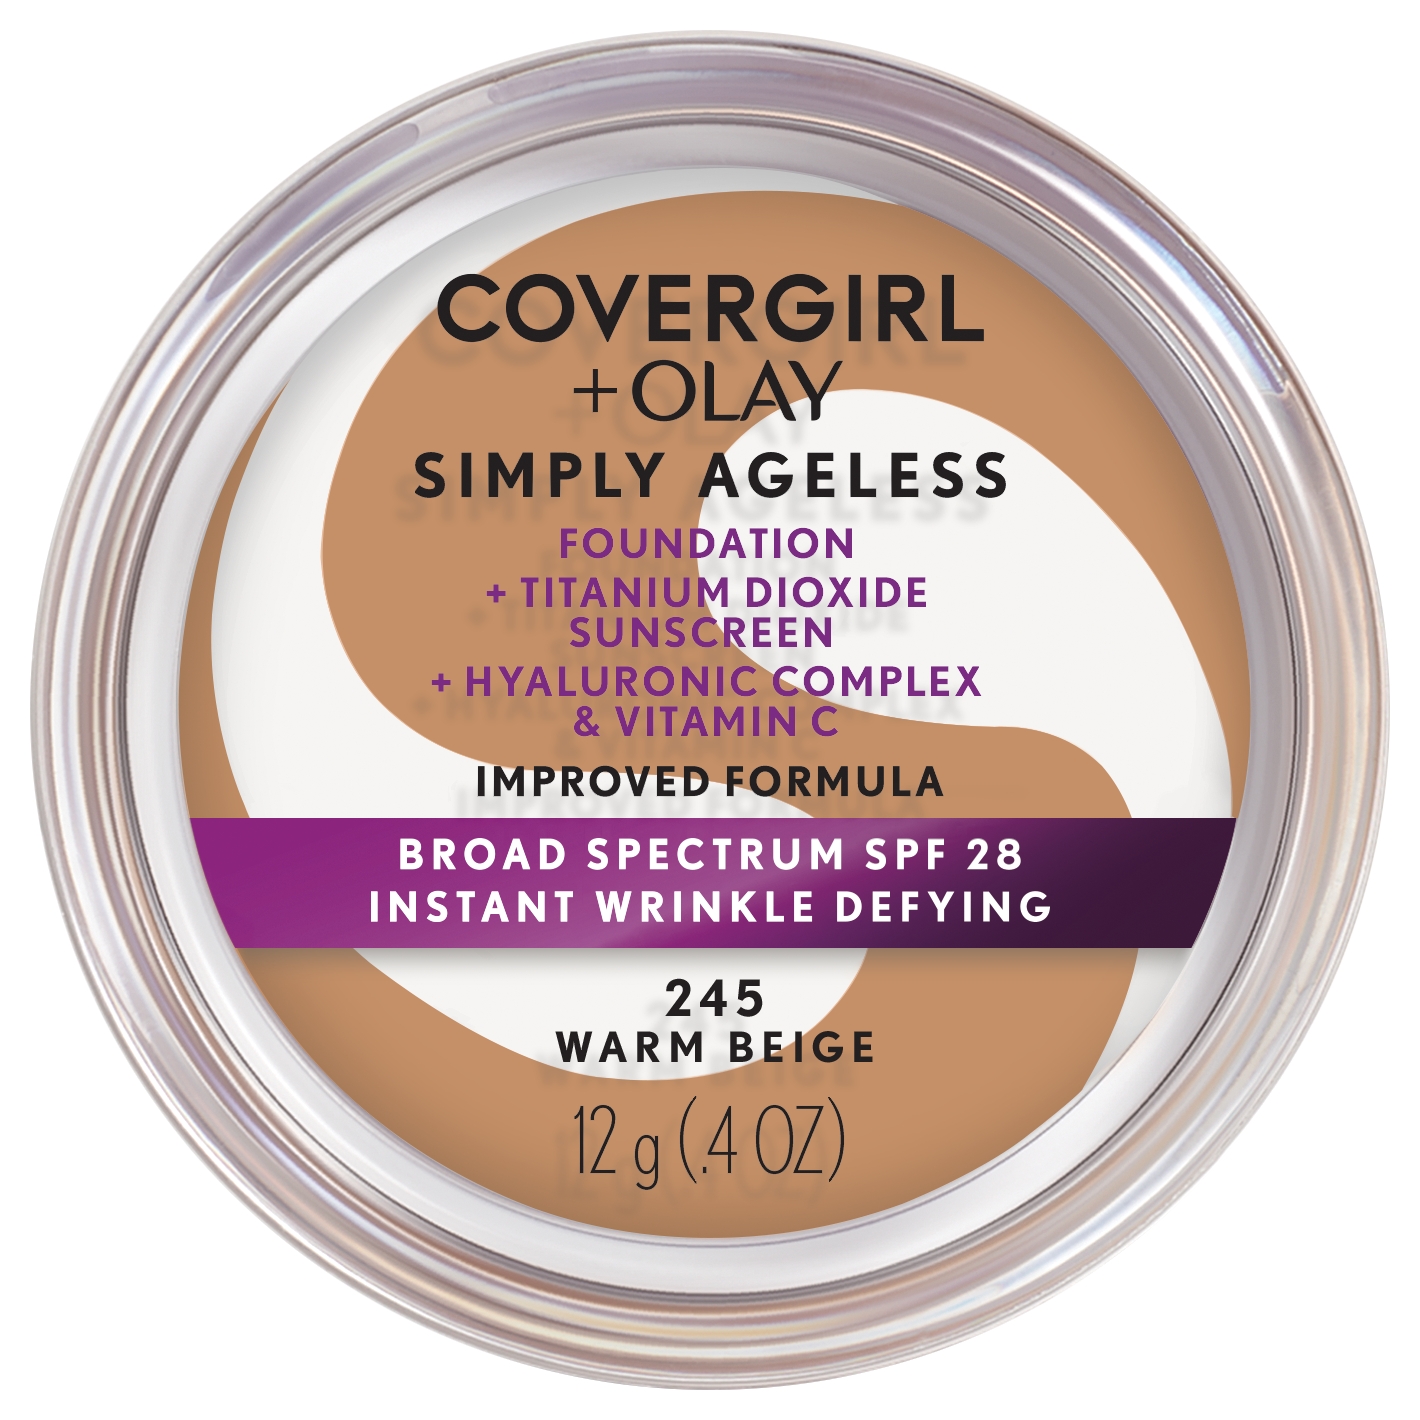 COVERGIRL + OLAY Simply Ageless Instant Wrinkle-Defying Foundation with SPF 28, Warm Beige, 0.44 oz - image 1 of 9